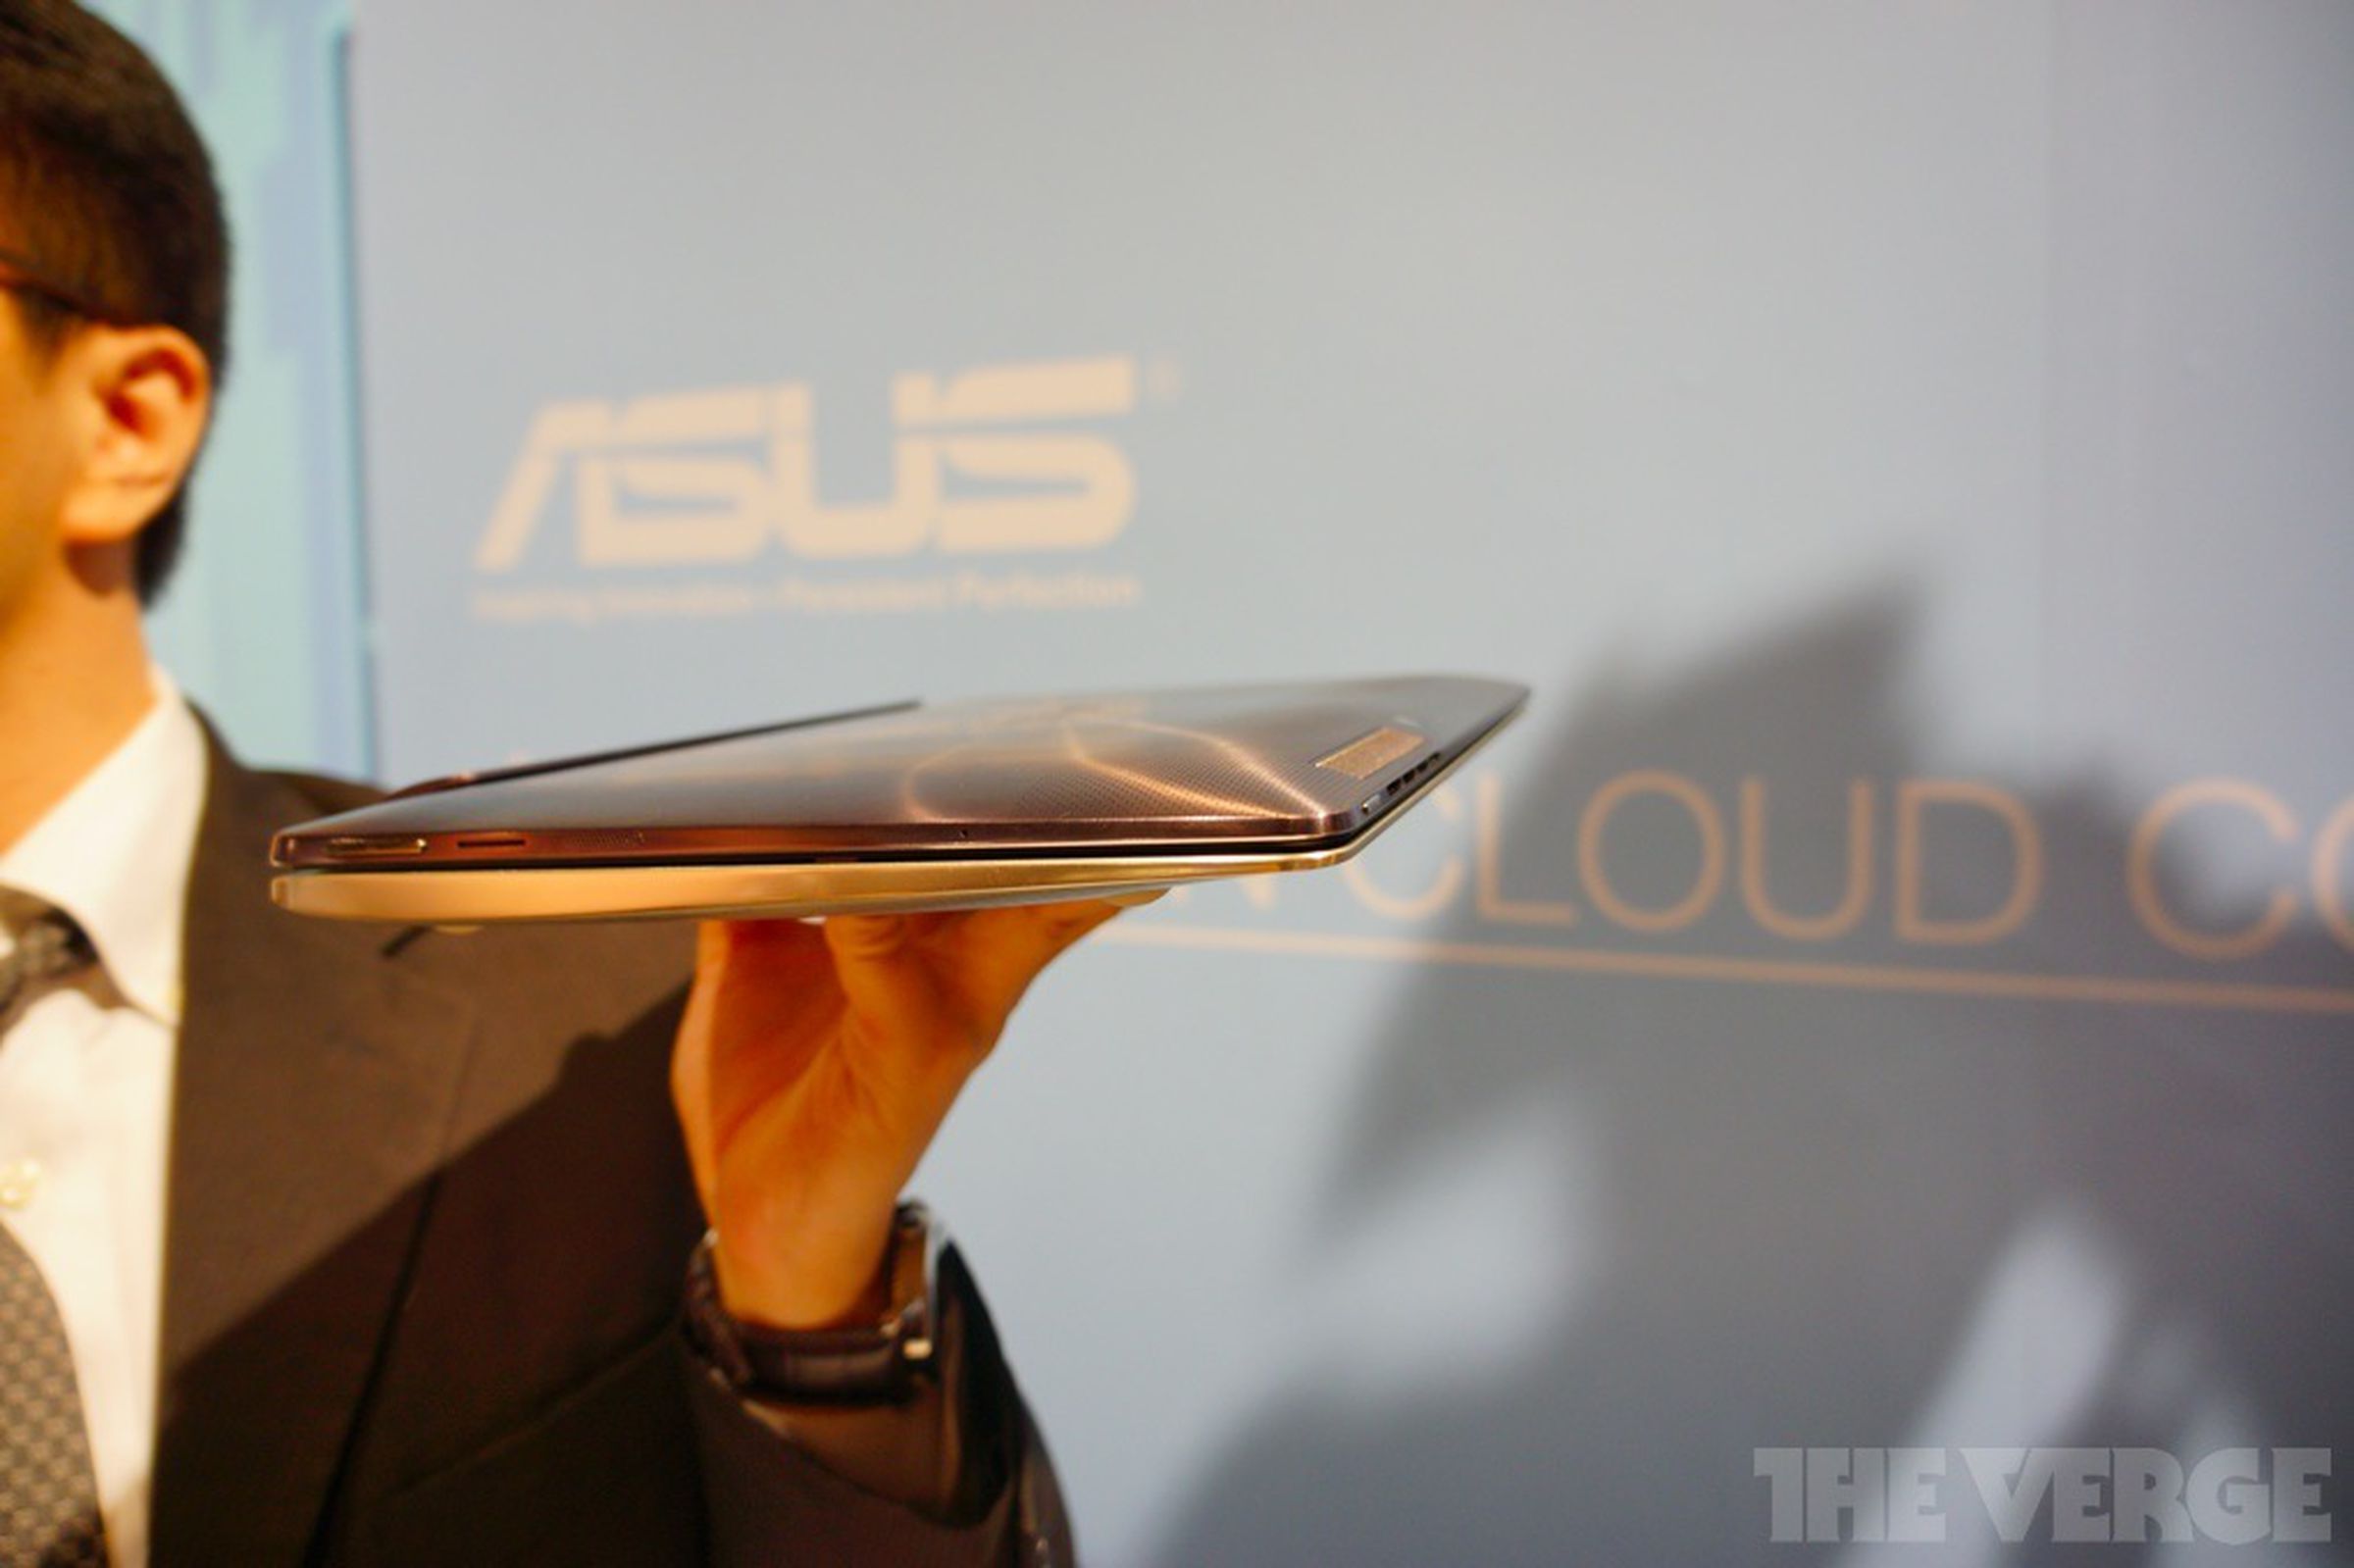 Asus Transformer Book pictures